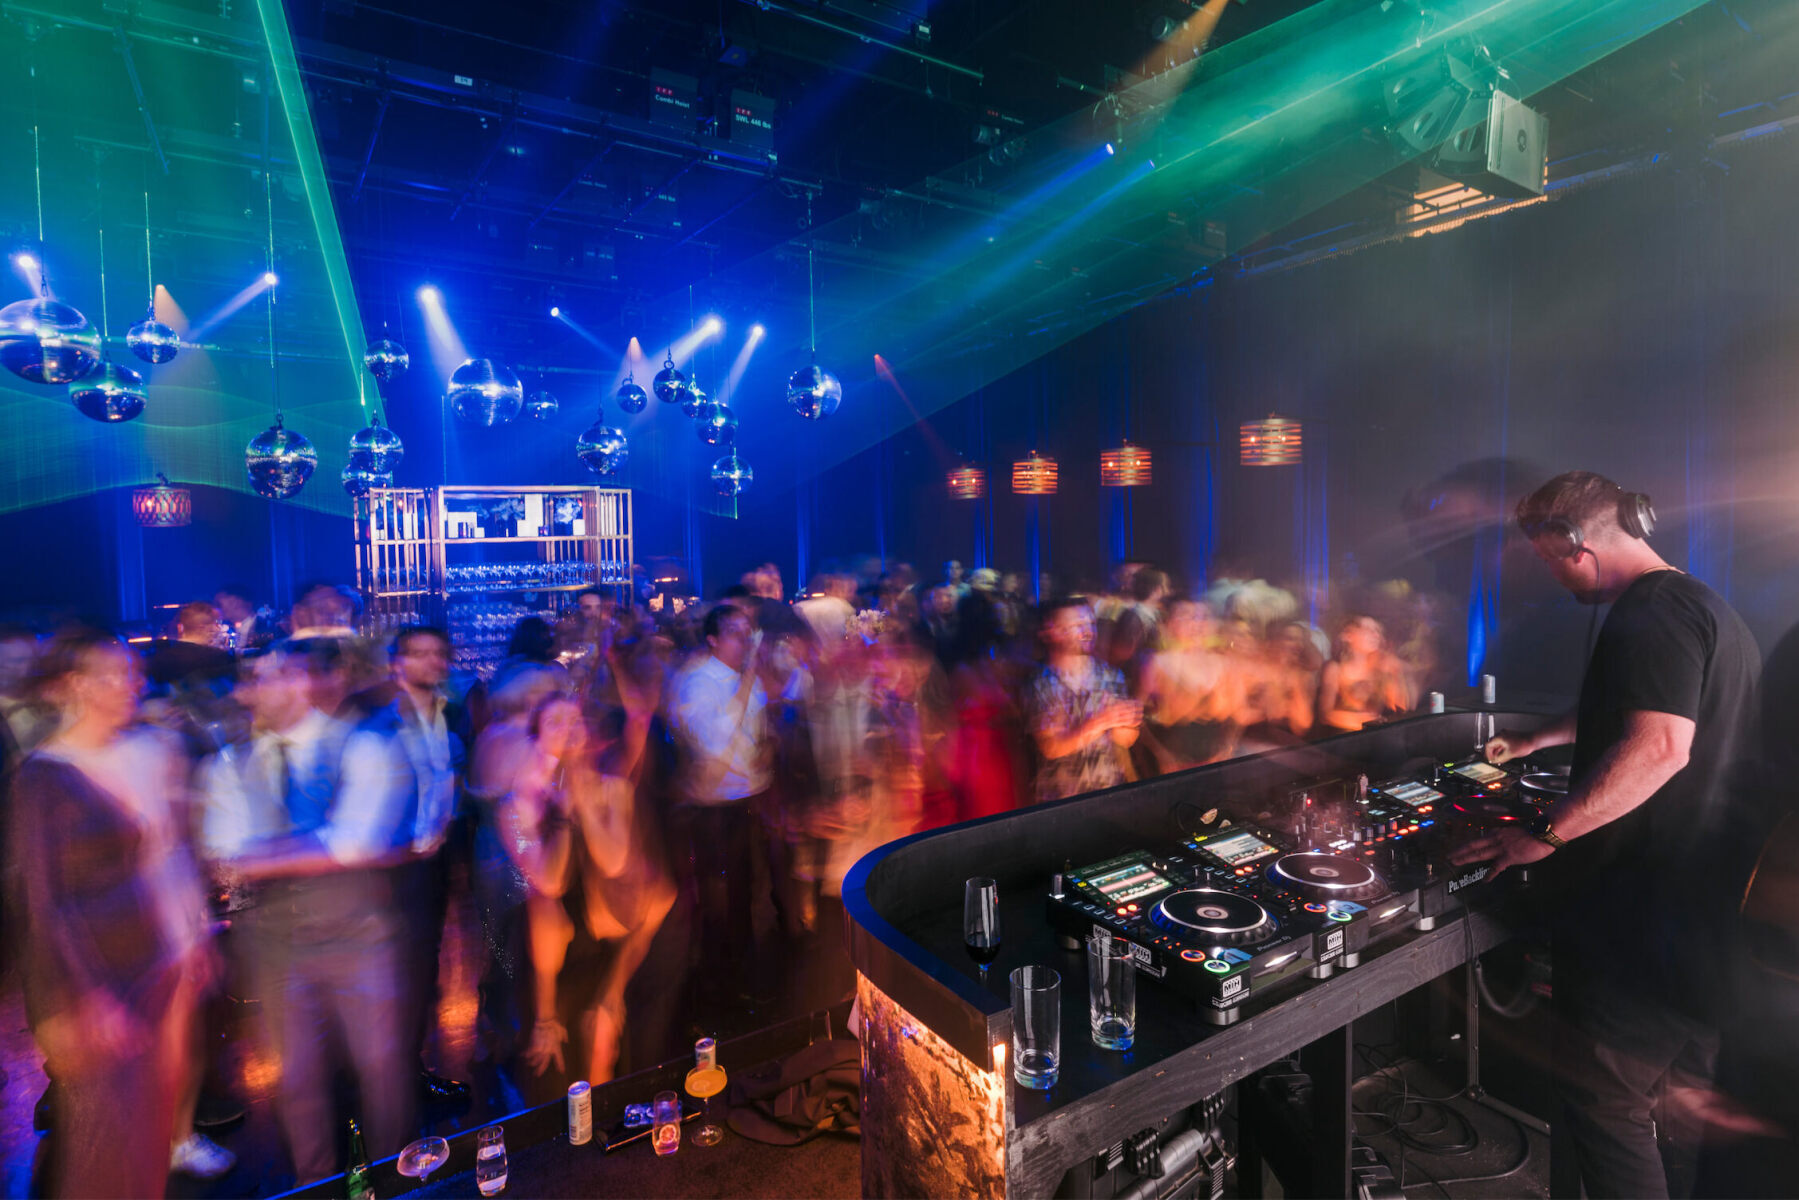 A DJ spins while guests dance at an after-party during a glam enchanted wedding.